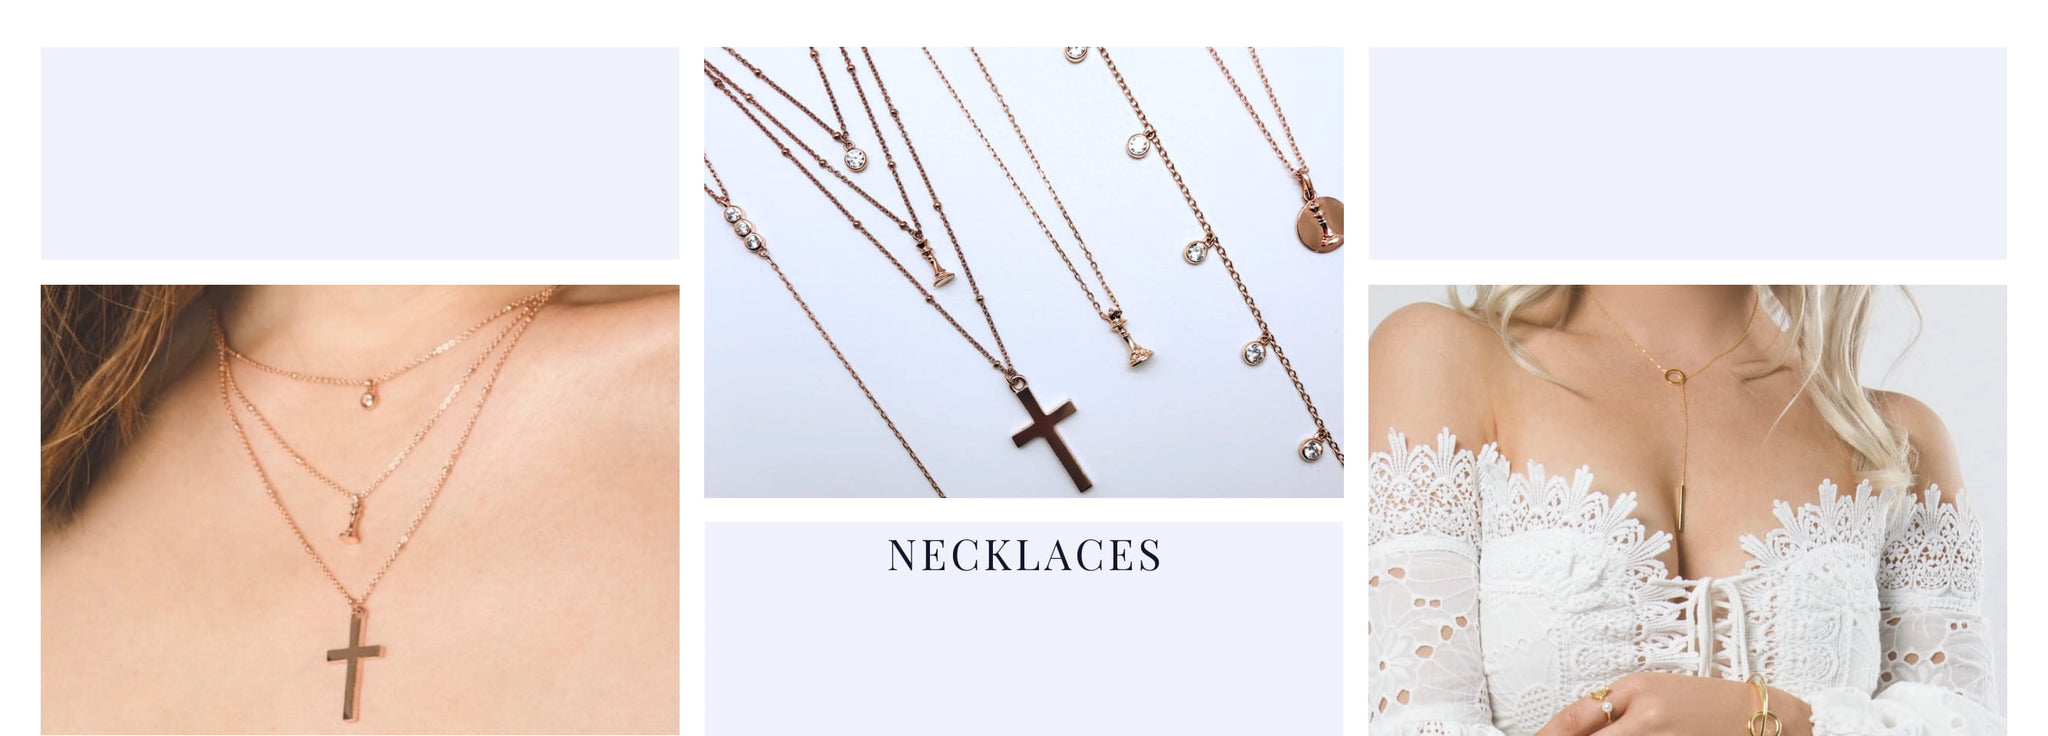 All Necklaces by Bella Mayford